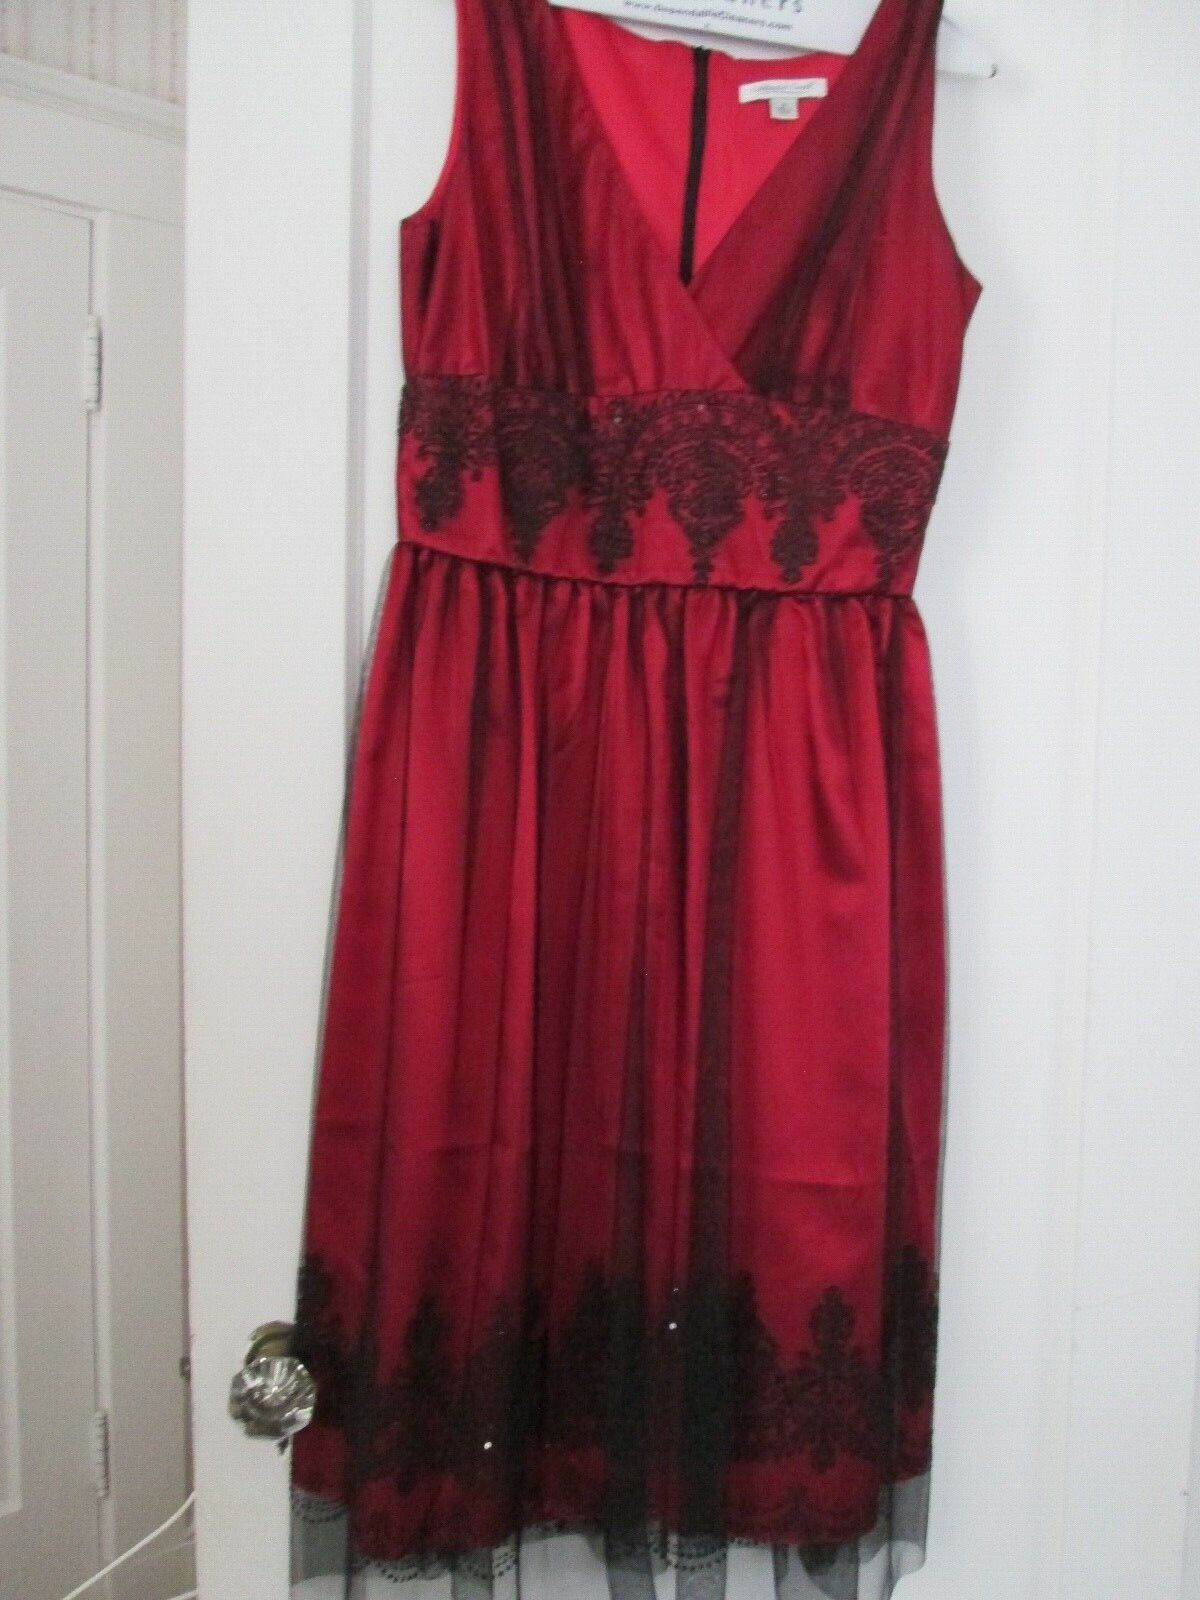 Sleeveless Red and Black Formal Dress- Size 8, Coldwater Creek